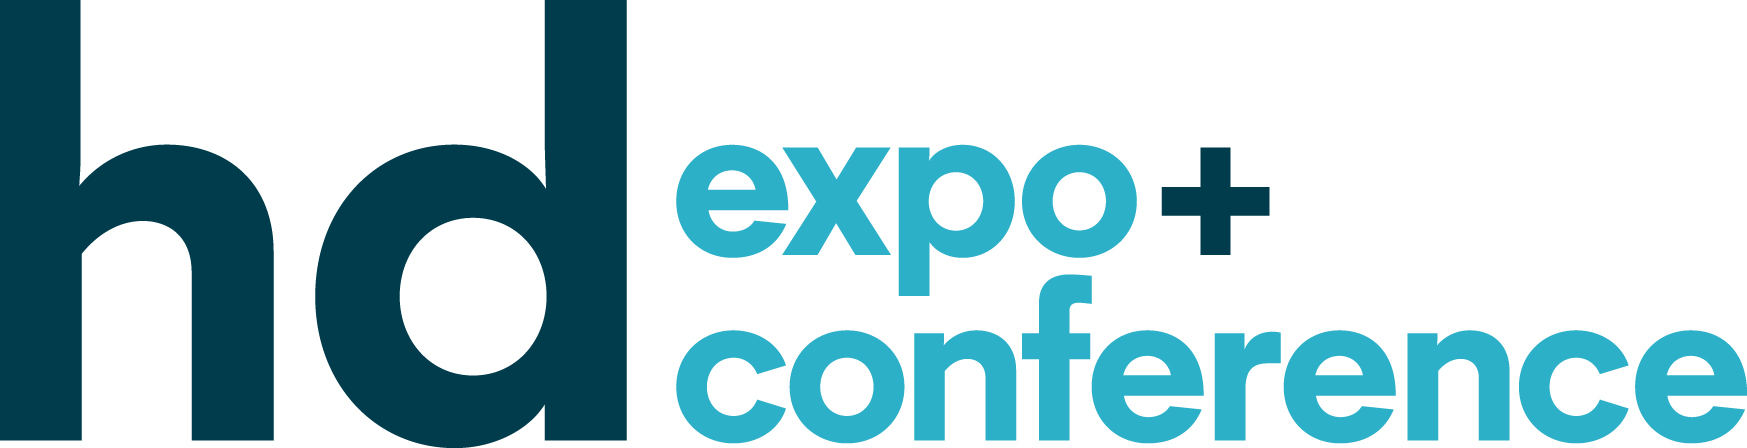 hd expo+conference